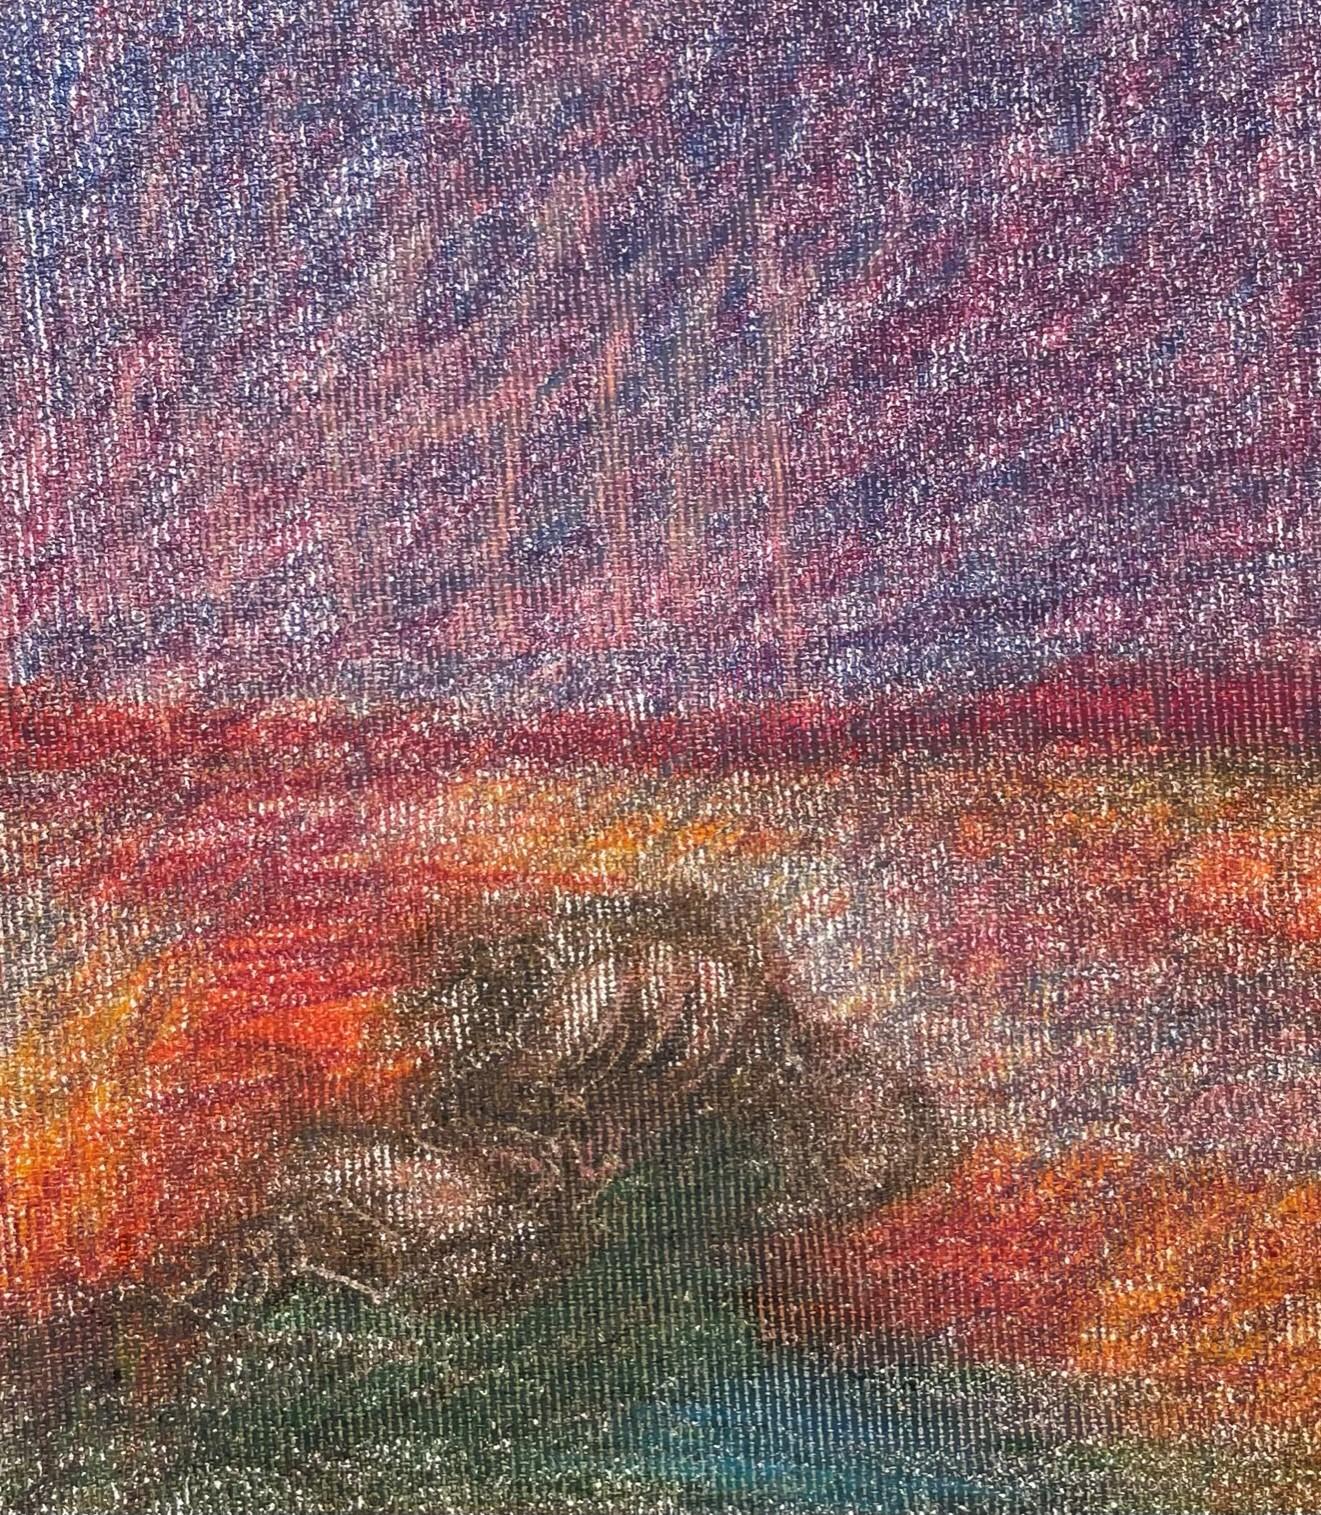 Body in the Field #1 - Red, Landscape, Coloured pencil, Drawing - Black Landscape Art by Zsolt Berszán